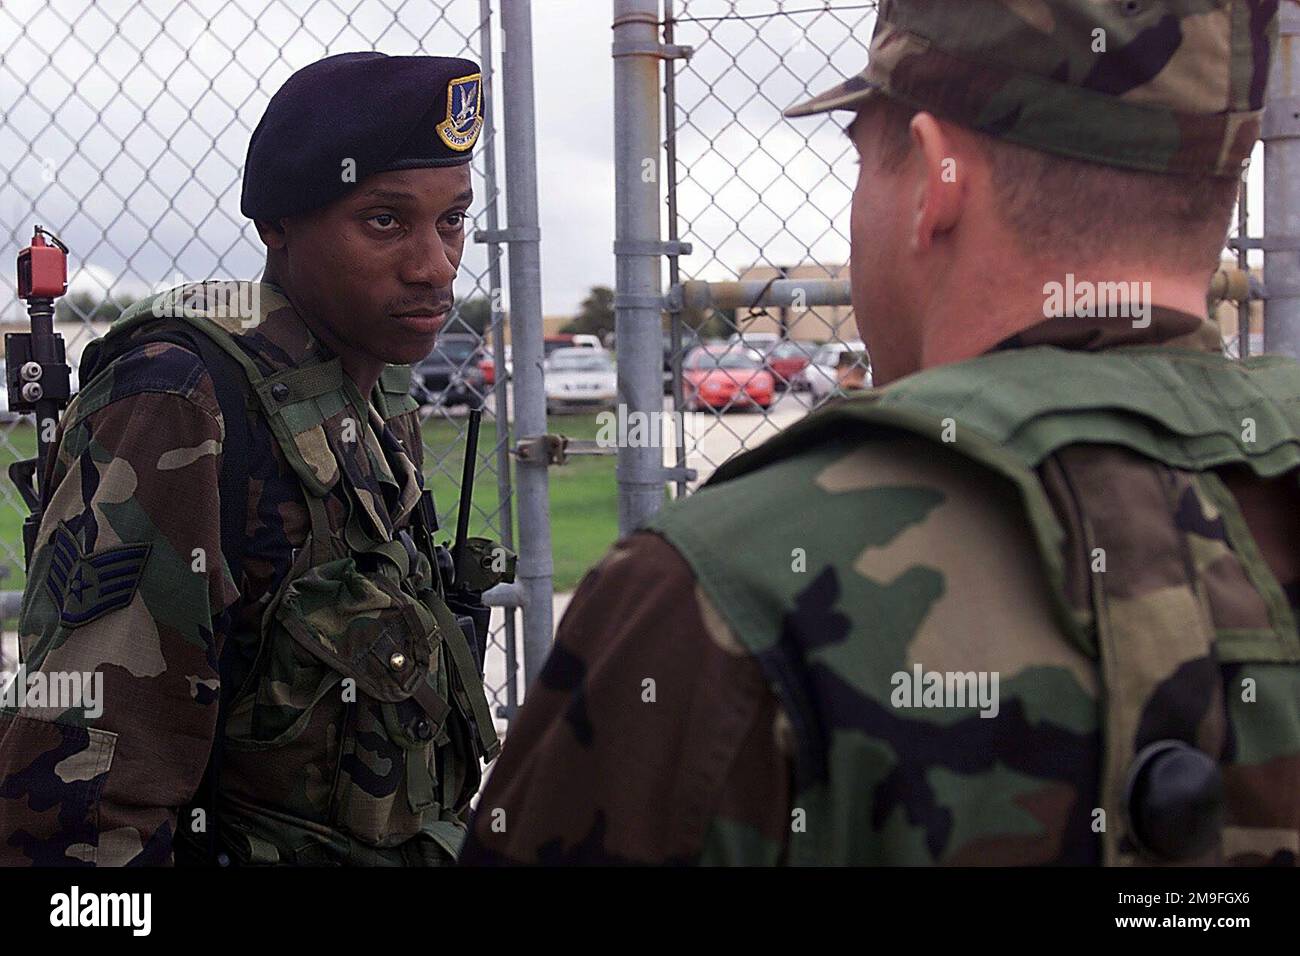 US Air Force STAFF Sergeant Duane Fowler, Air Force Reserve Command, verifies identification from US Air Force Captain James Jefferson in the Base Response event during DEFENDER CHALLENGE 2000 at Lackland Air Force Base, Texas, on Oct. 31, 2000. Defender Challenge is the annual Air Force wide competition sponsored by Air Force Security Forces. This competition showcases the talents and capabilities of 13 international Security Forces teams in 24 events six days. Subject Operation/Series: DEFENDER CHALLENGE '00 Base: Lackland Air Force Base State: Texas (TX) Country: United States Of America (U Stock Photo